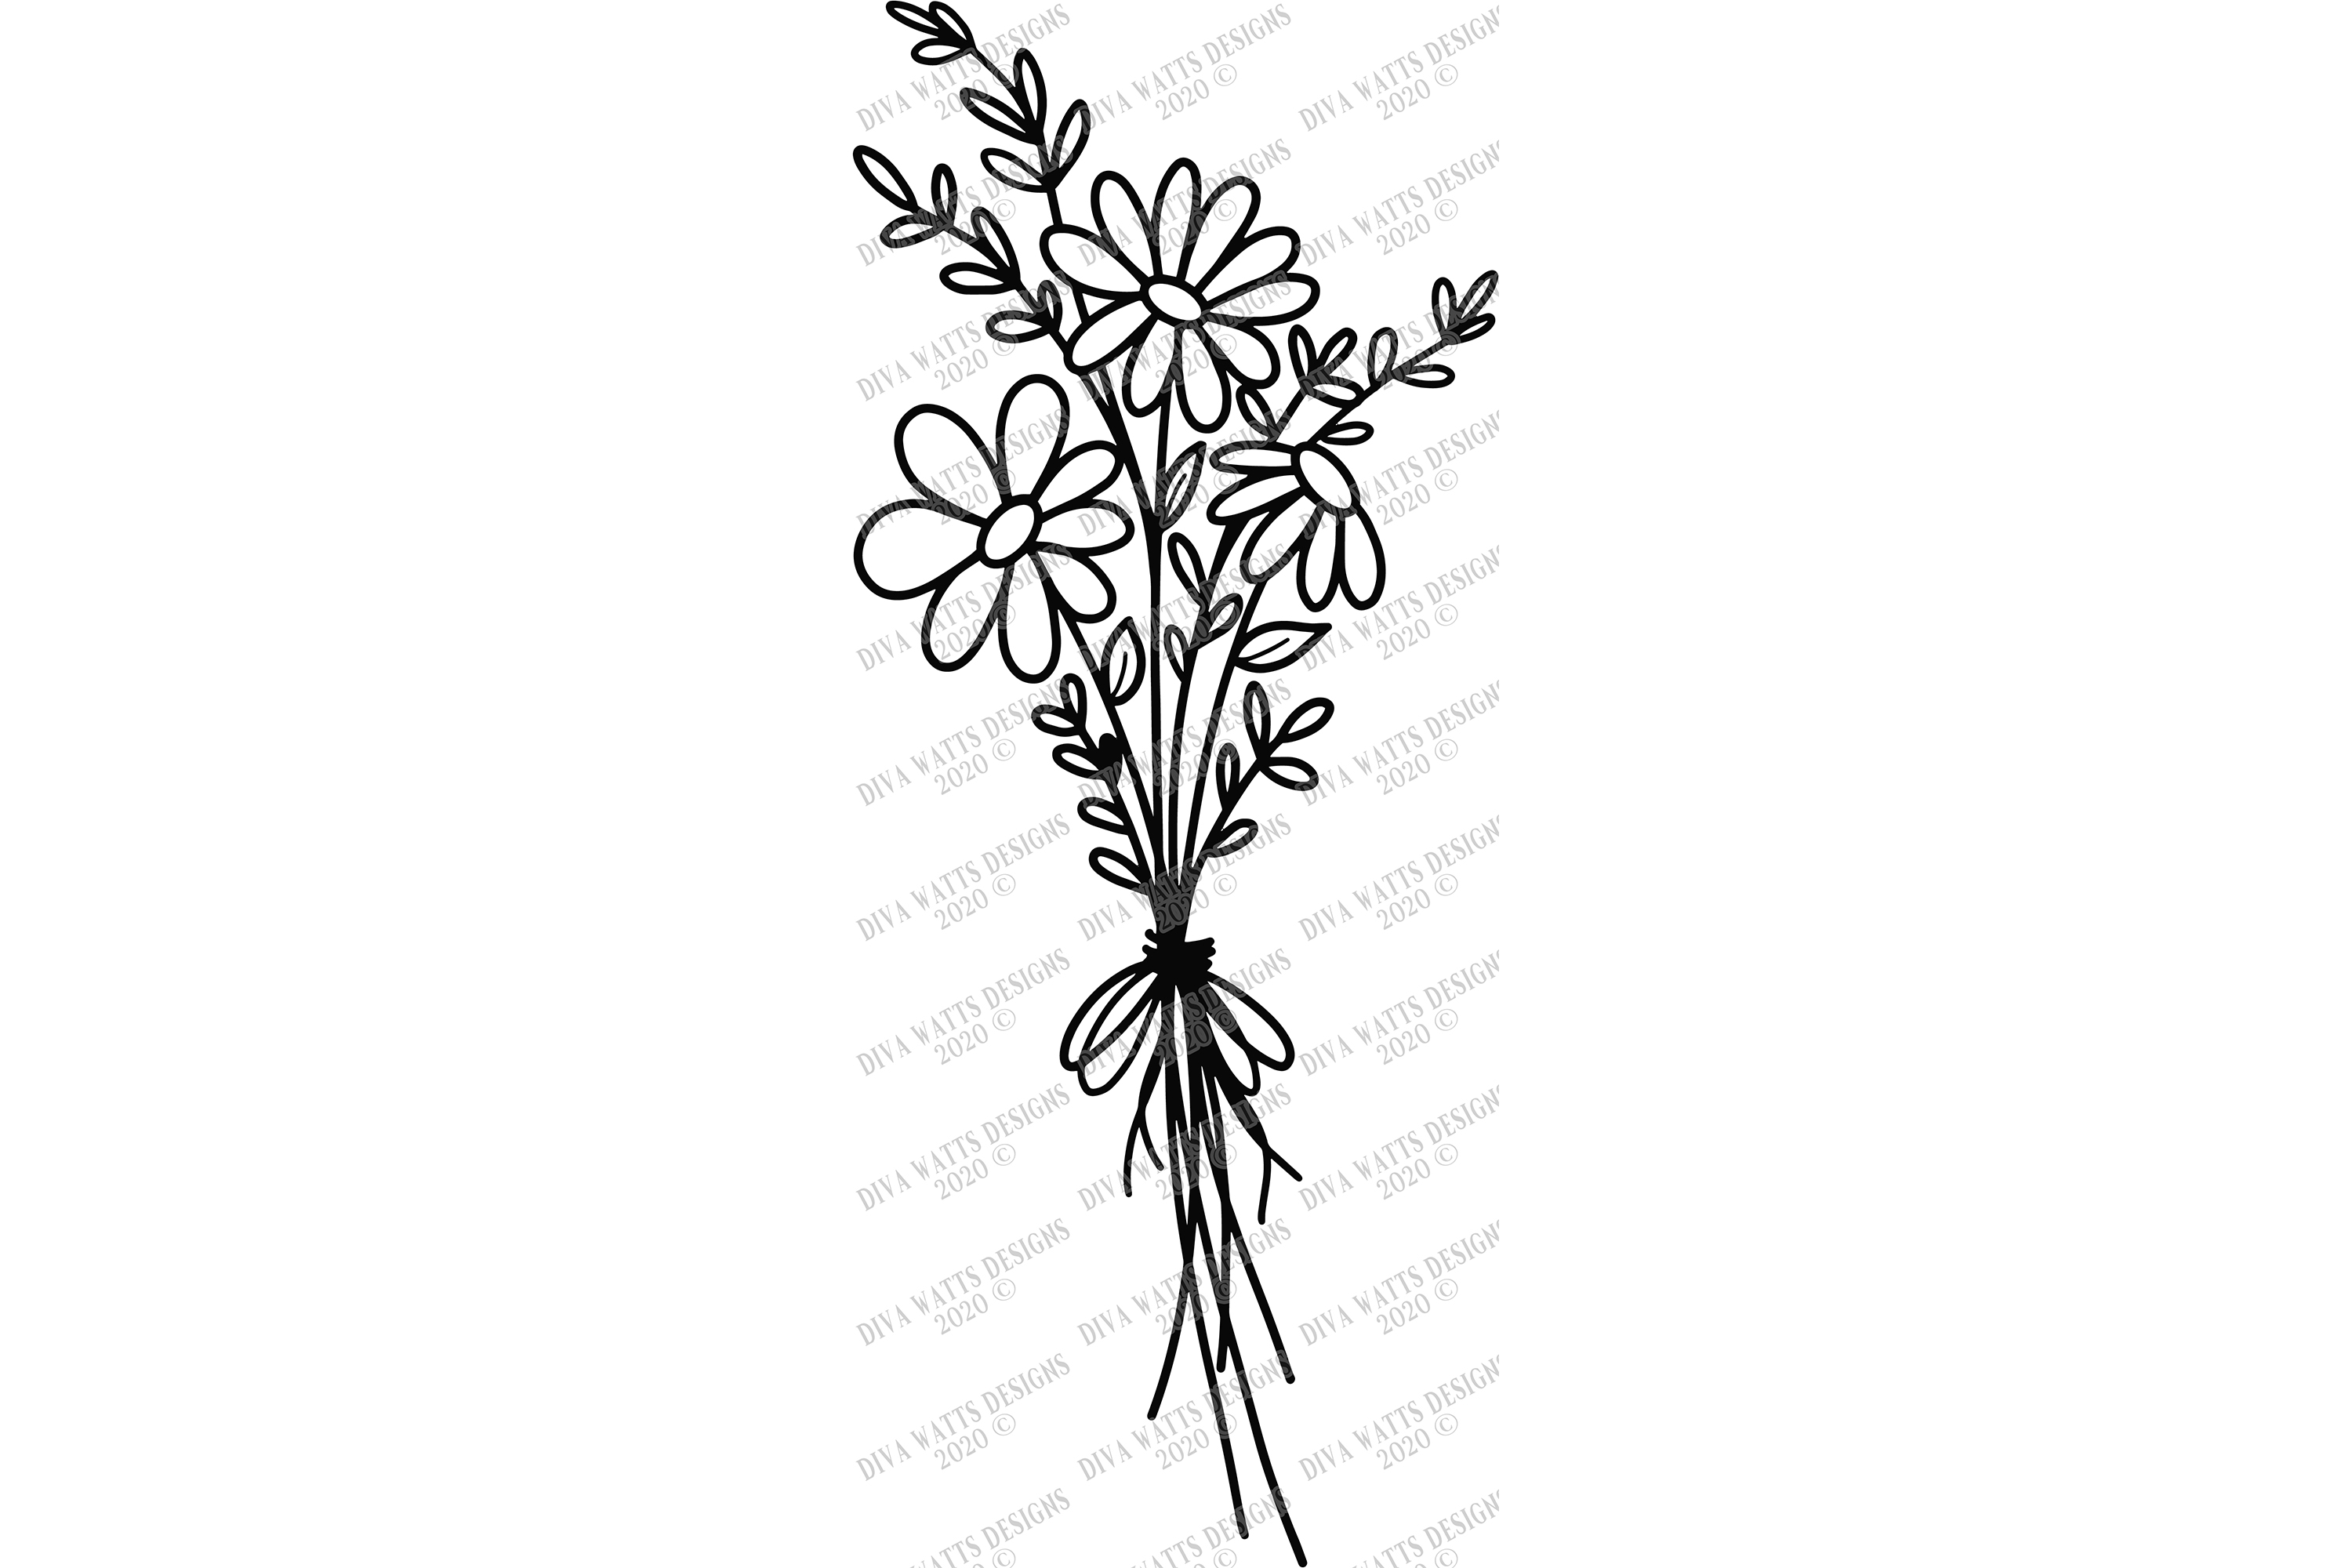 Download Daisies and Wildflowers Bouquet - Flowers - Floral - SVG EPS